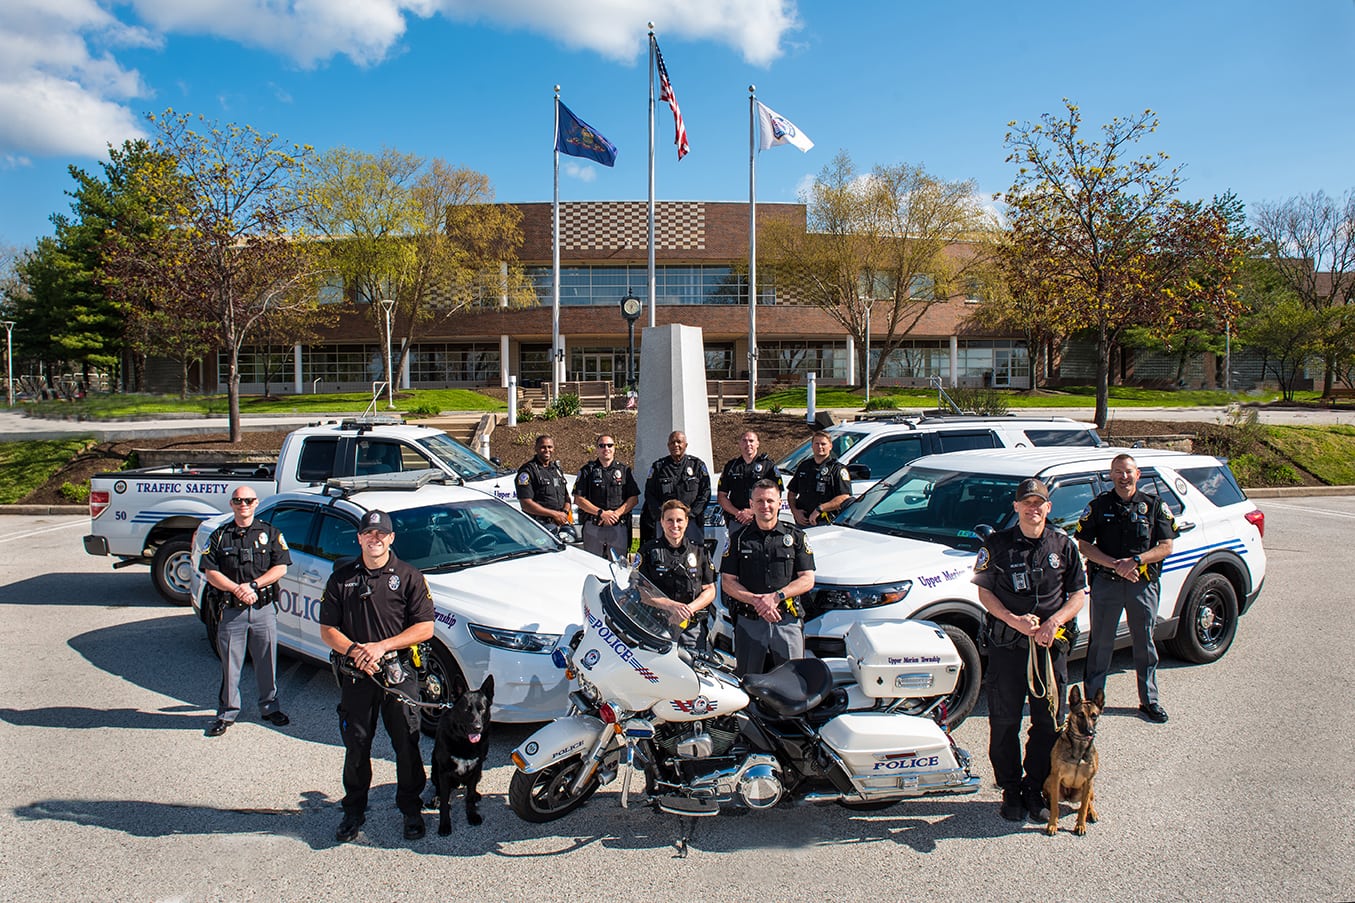 Police department posing in front of vehicles  